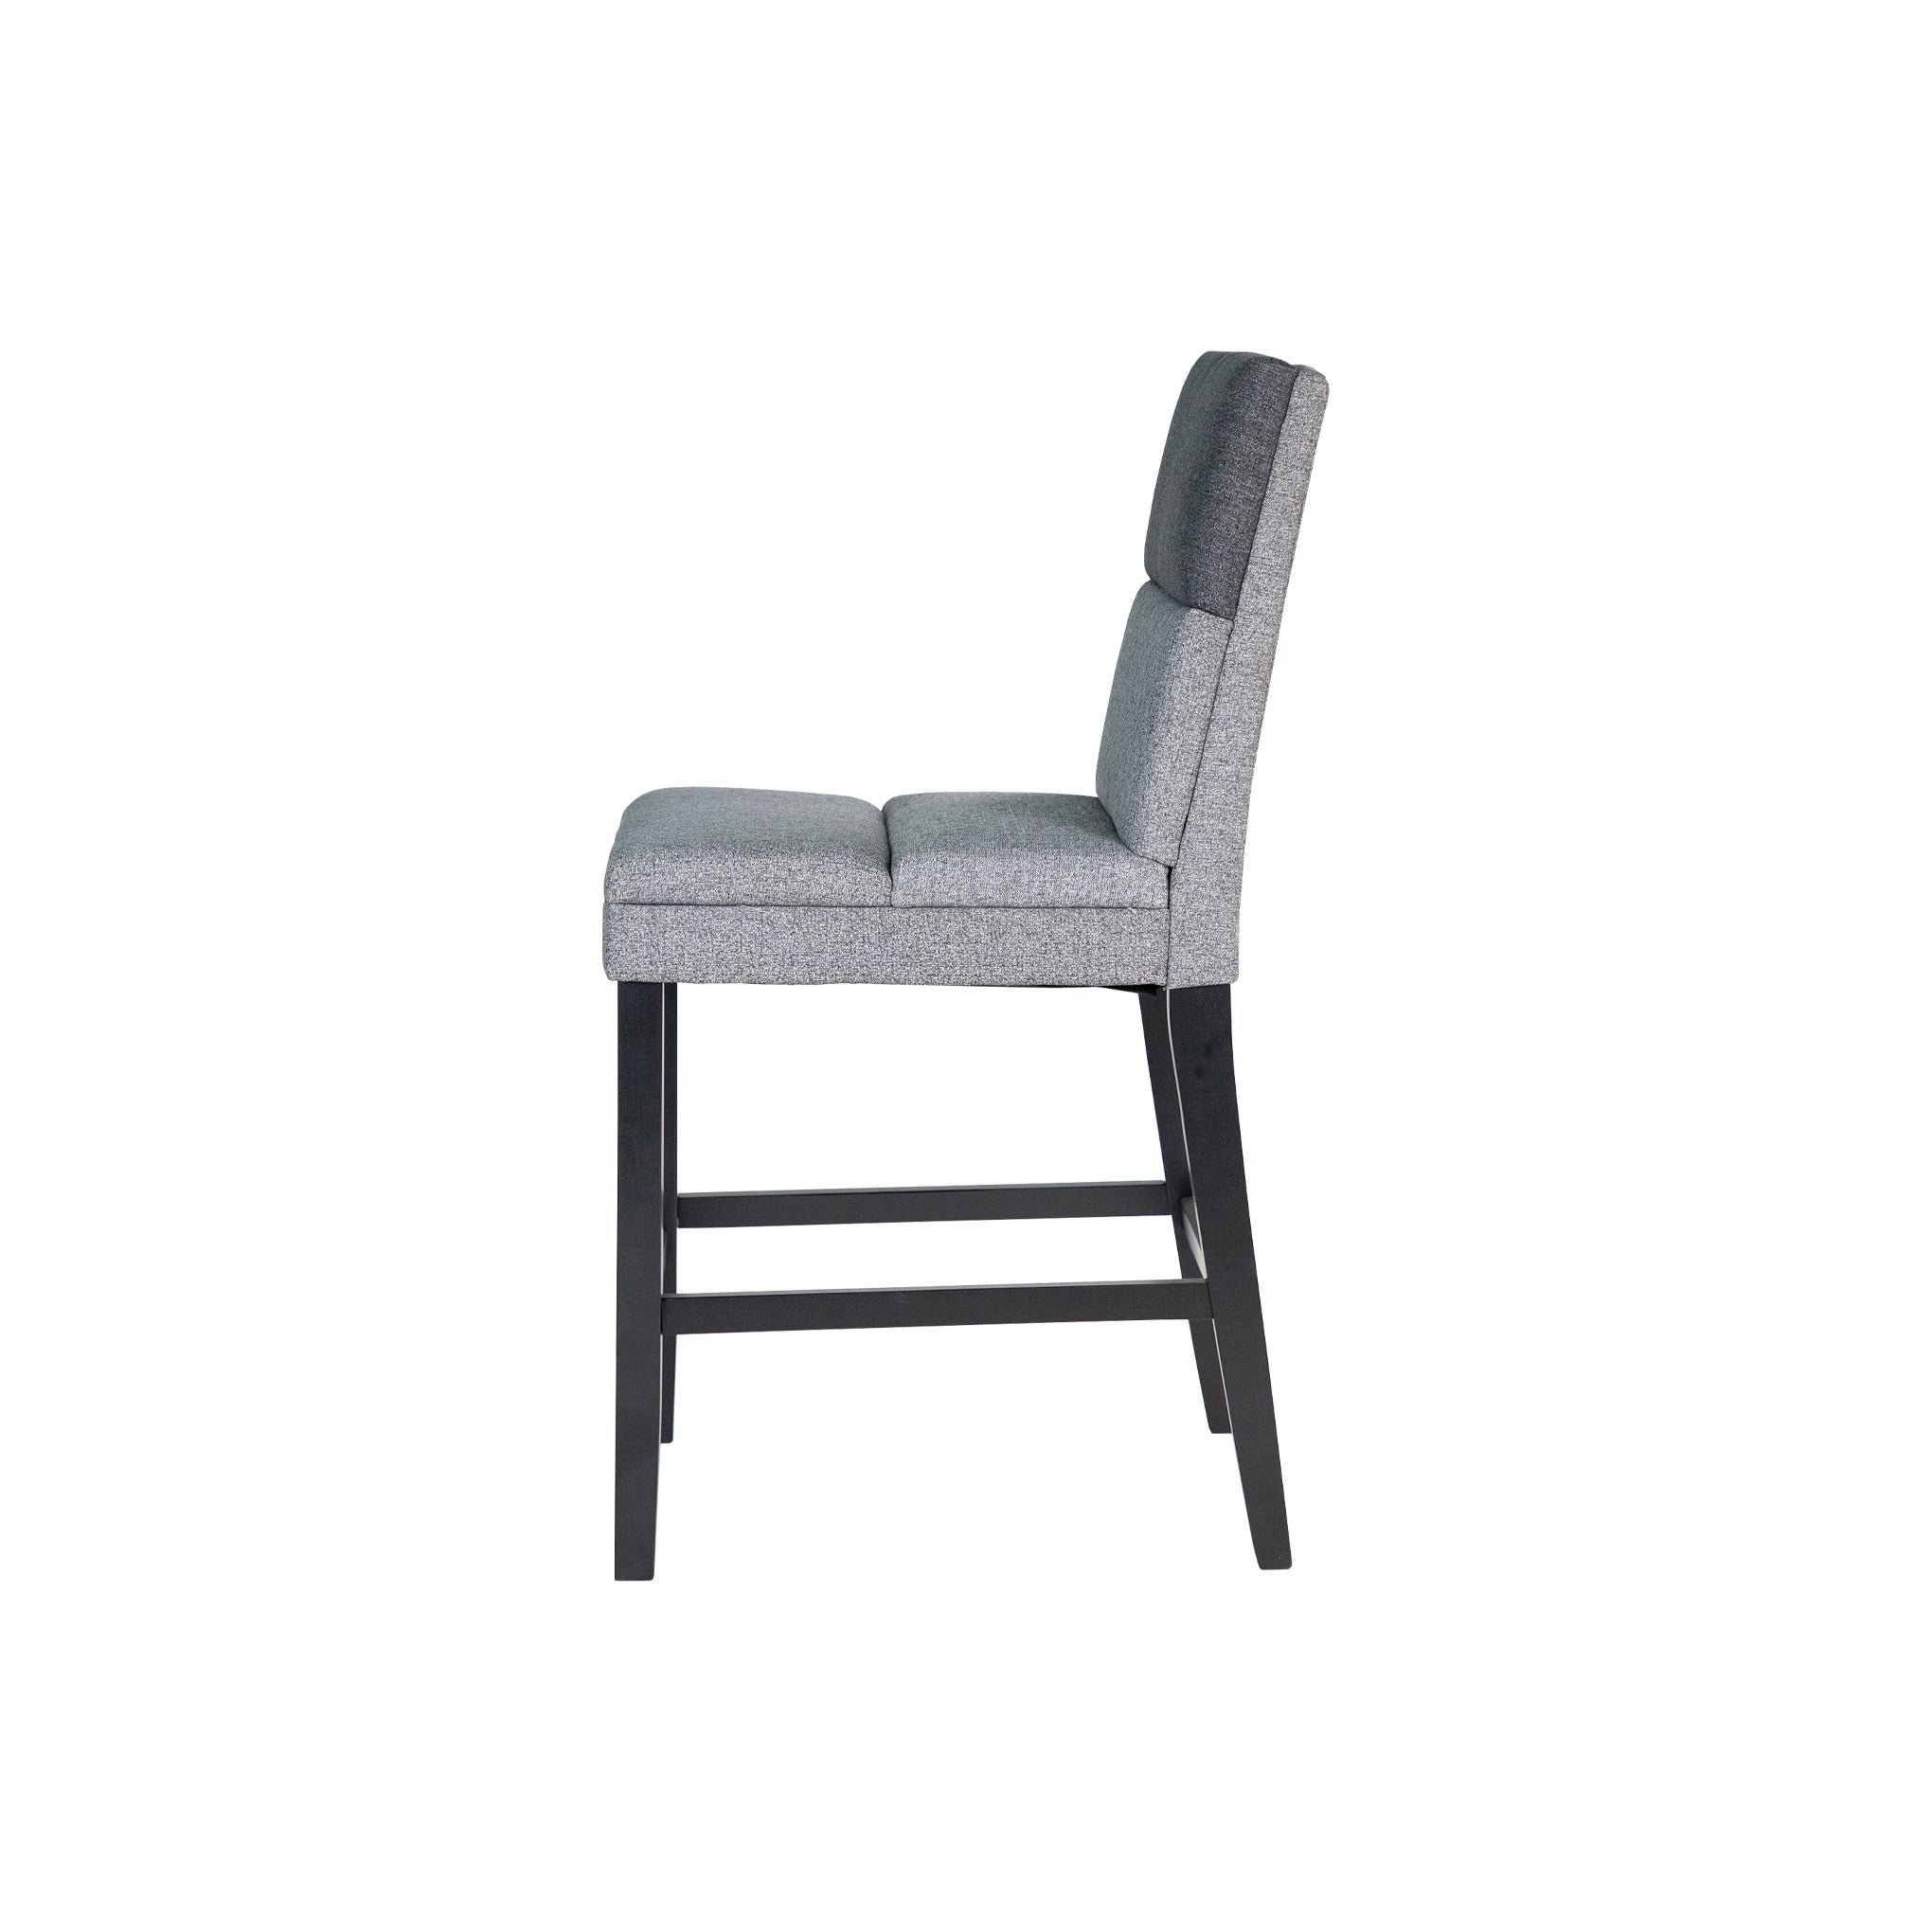 <b> Nomoty Counter Height Dining Chair </b><br>W450 X D590 X H980MM SEAT HEIGHT : 600MM